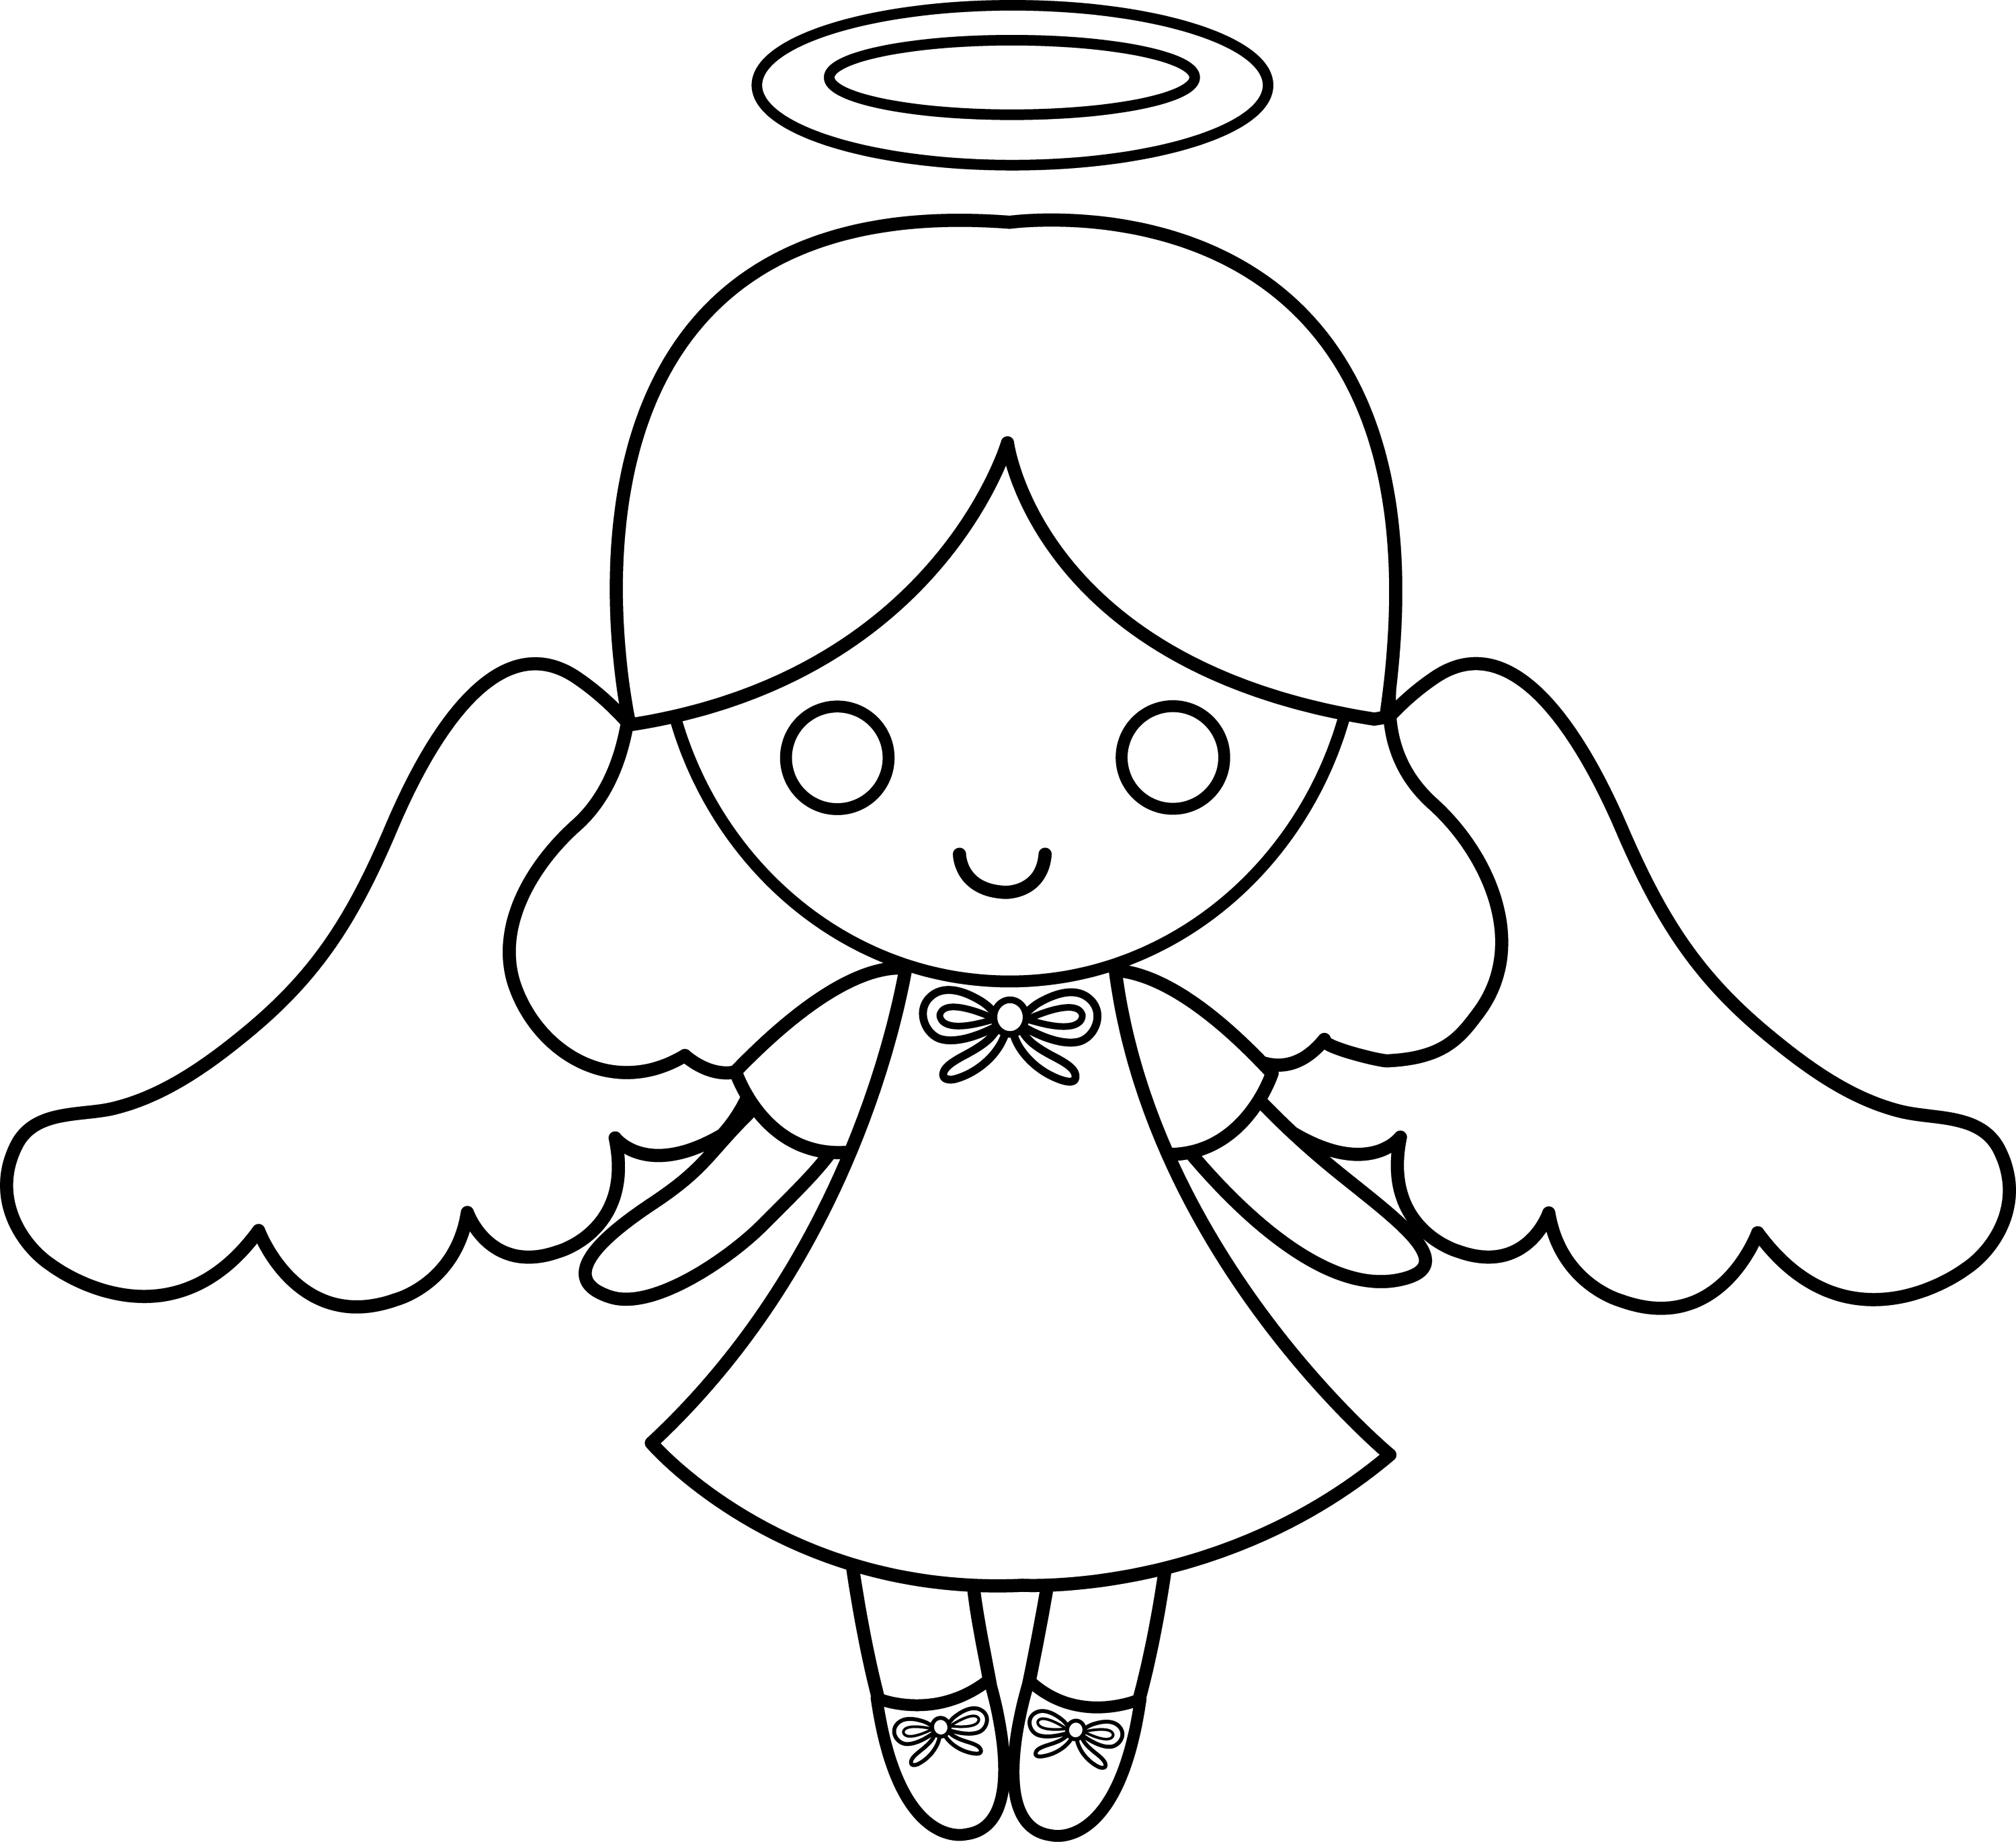 free clipart of black angels - photo #39